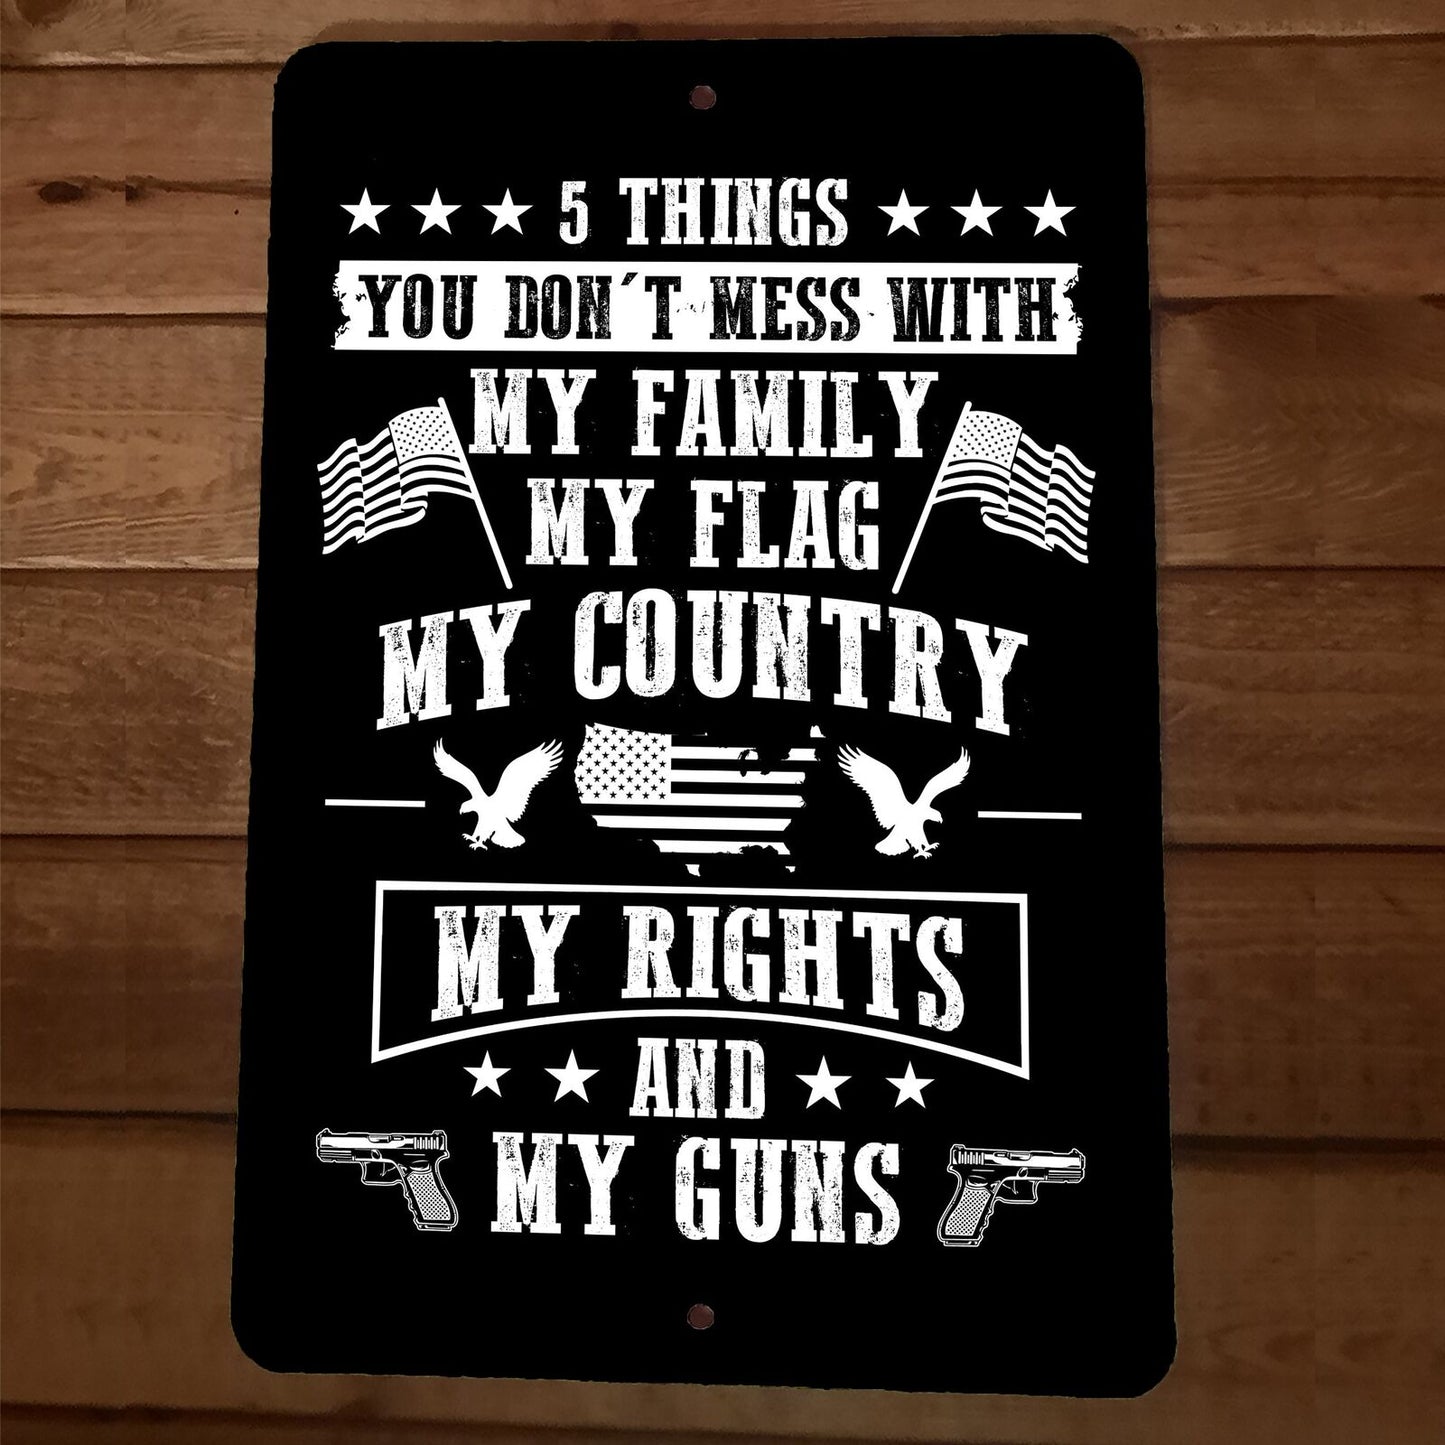 5 Things You Dont Mess With USA America 8x12 Metal Wall Sign Poster July 4th